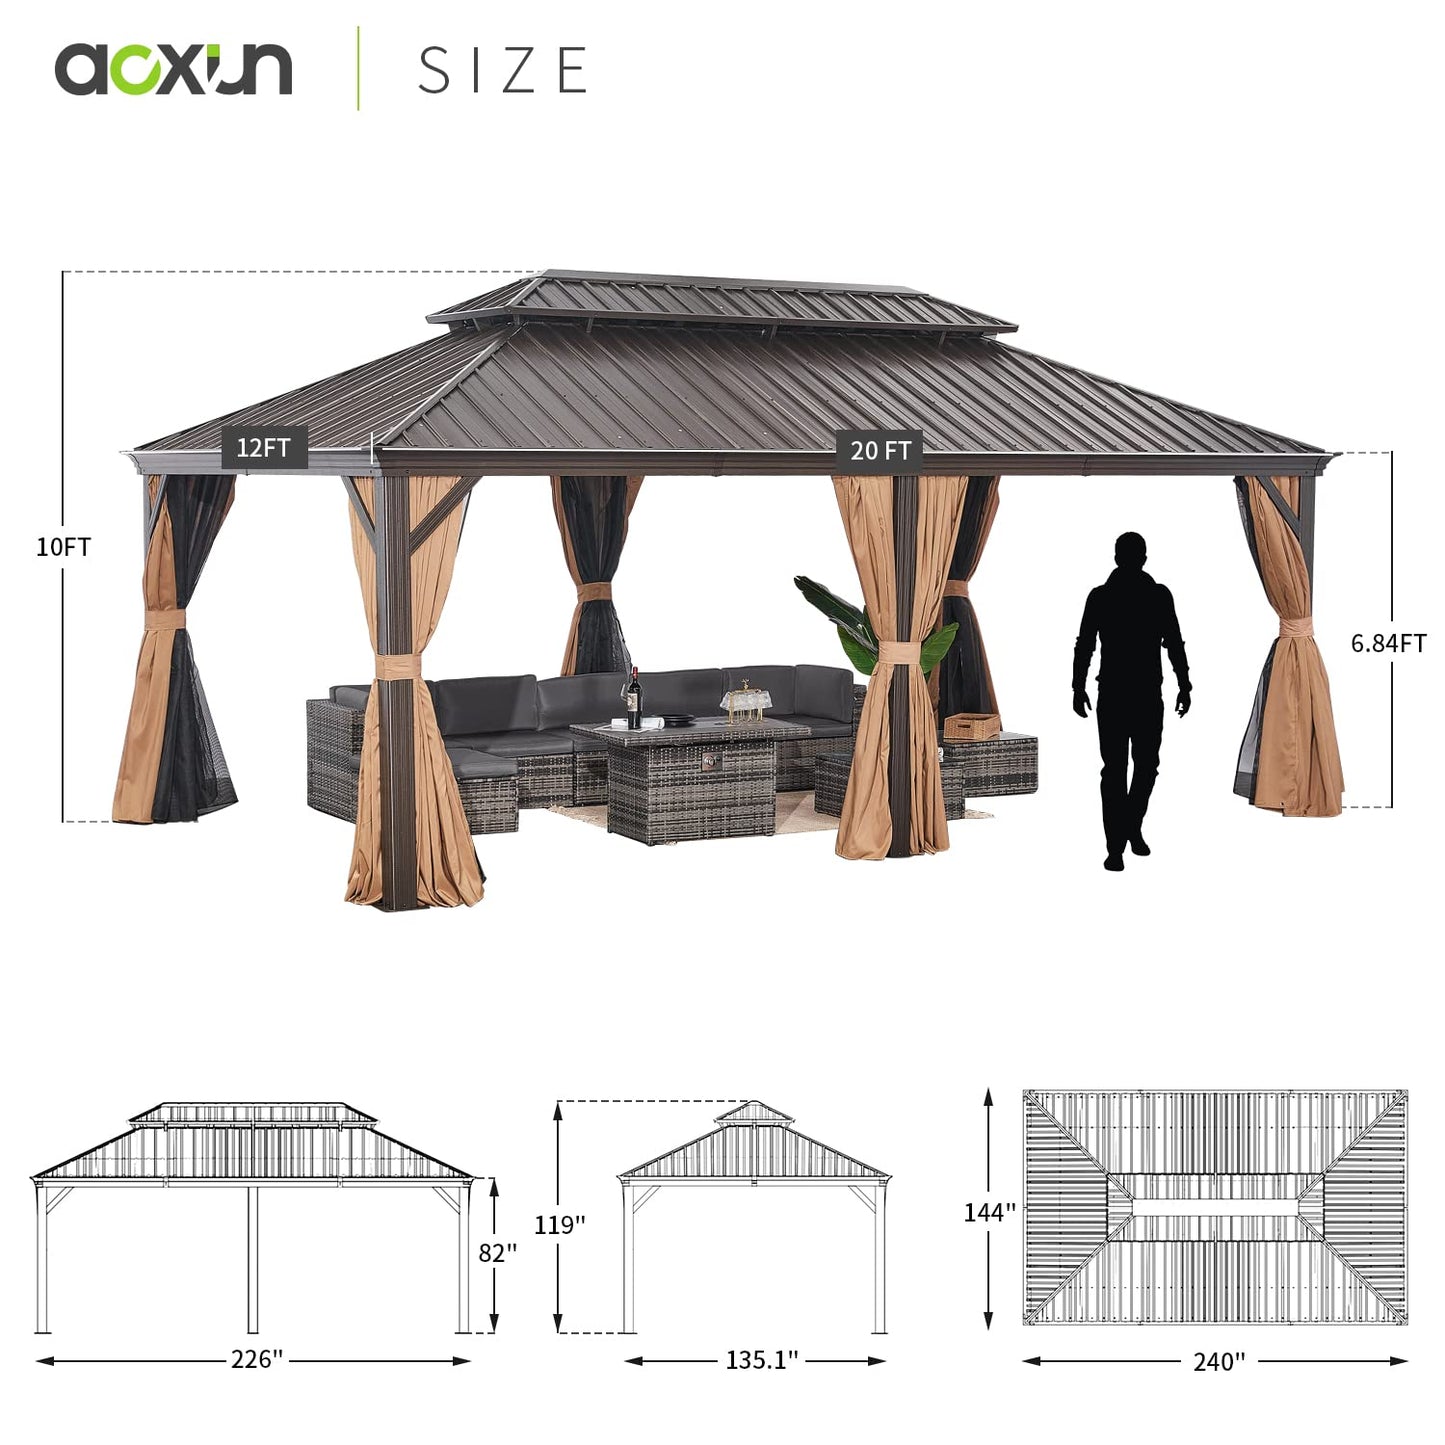 Aoxun 12' x 20' Permanent Hardtop Gazebo with Galvanized Steel Double Roof and Aluminum Frames Outdoor Large Pavilion Gazebo for Patio Deck Garden,